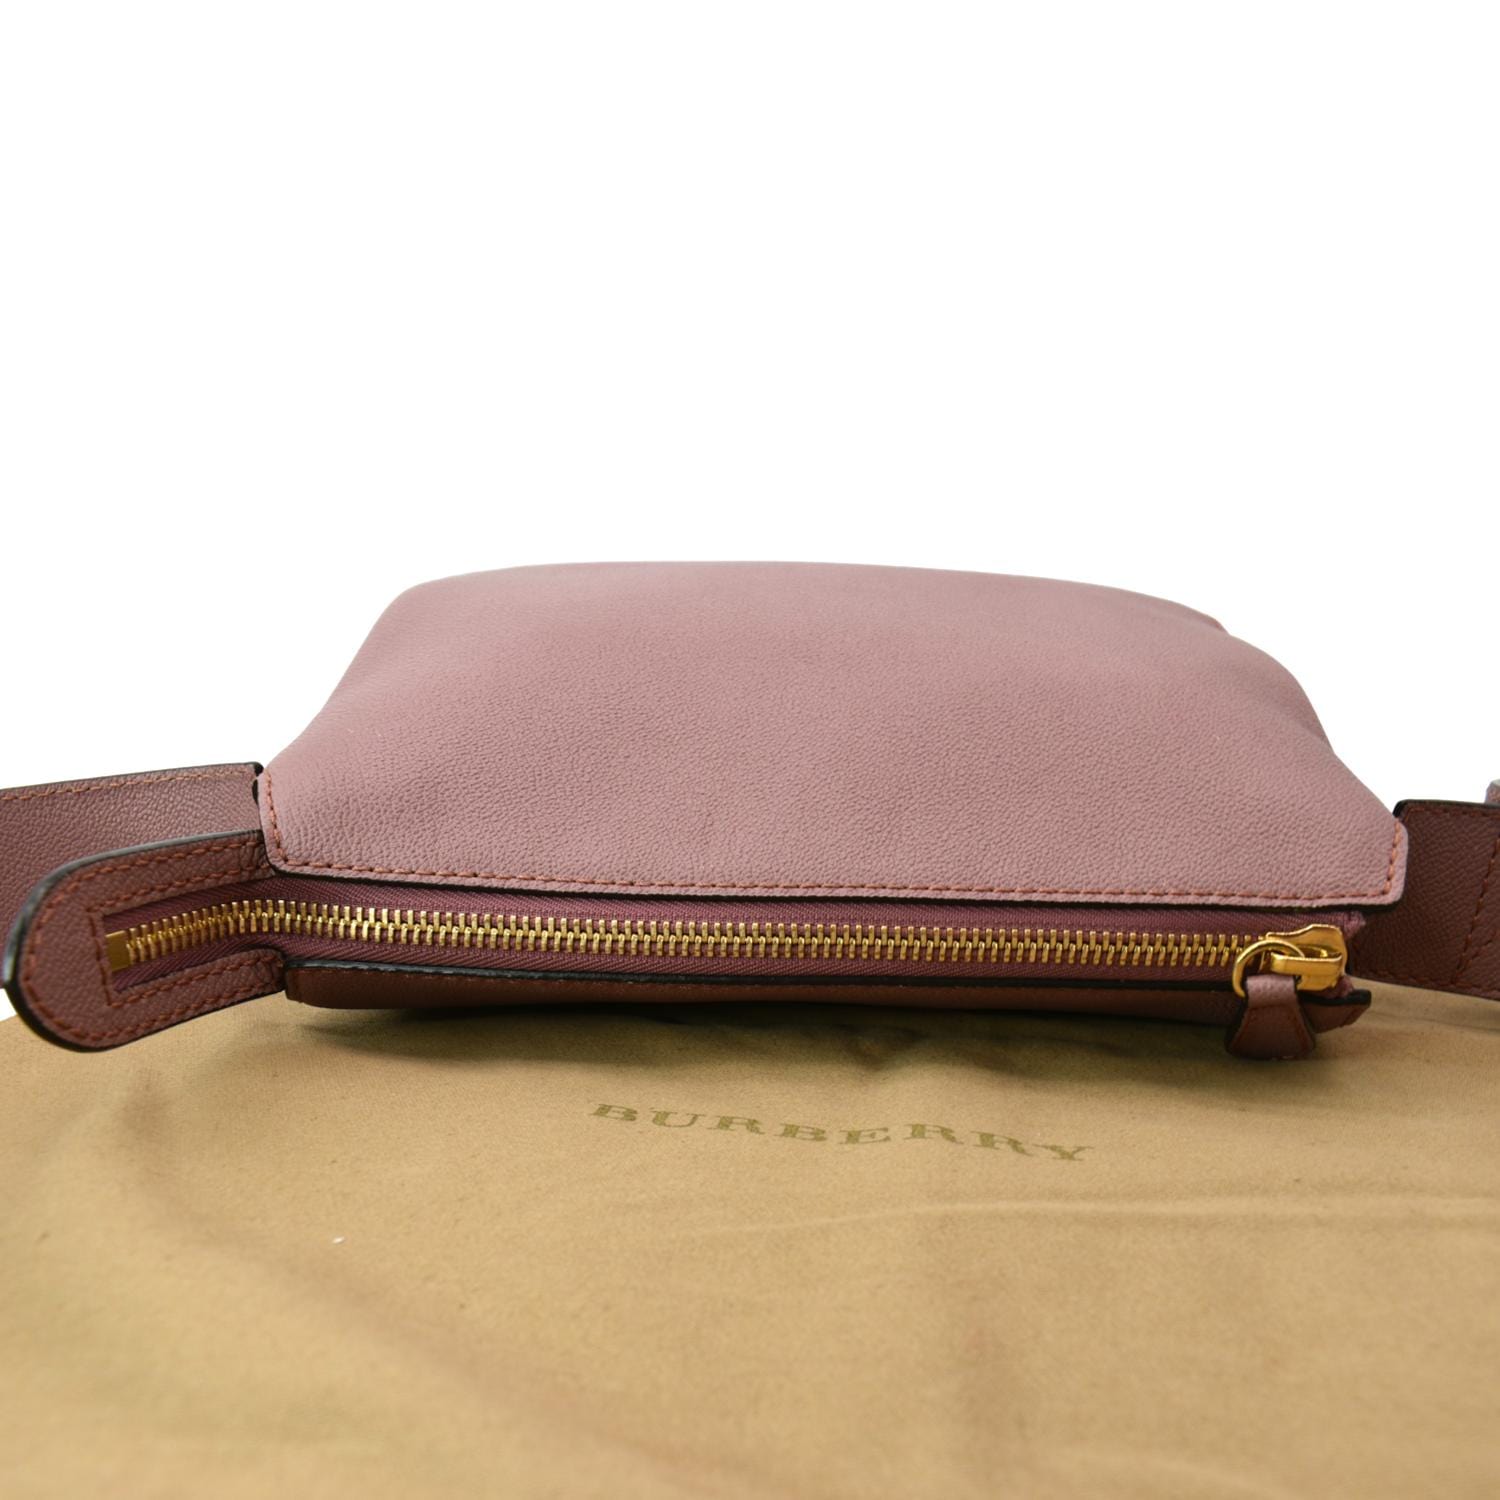 Burberry Solid Leather Crossbody Bag - Pink Crossbody Bags